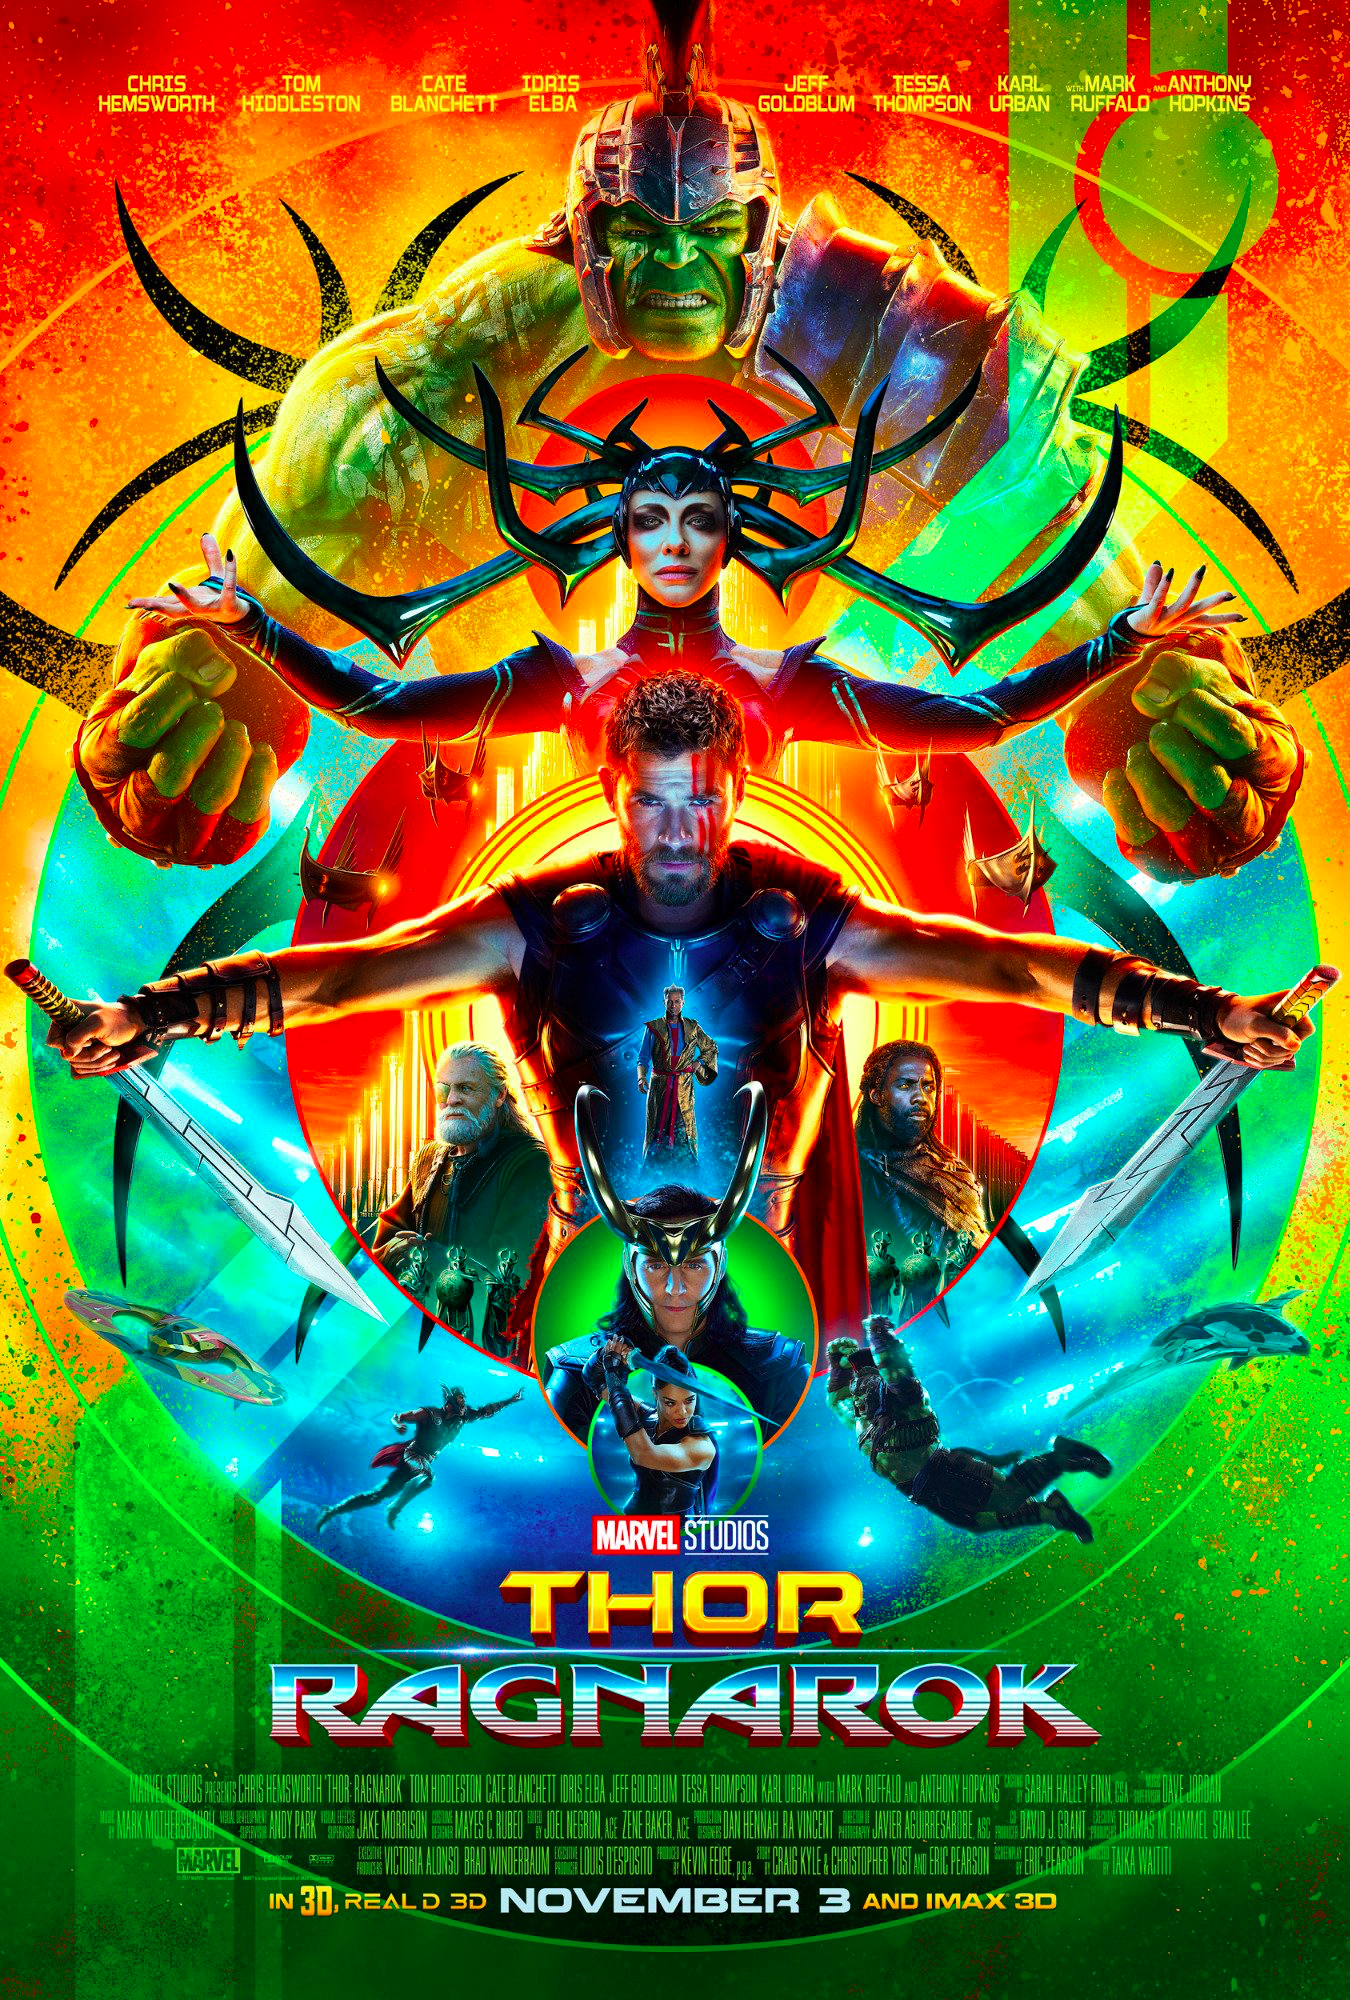 The One Thing The New Thor: Ragnarok Poster Needed To Be Perfect Was More Jeff Goldblum